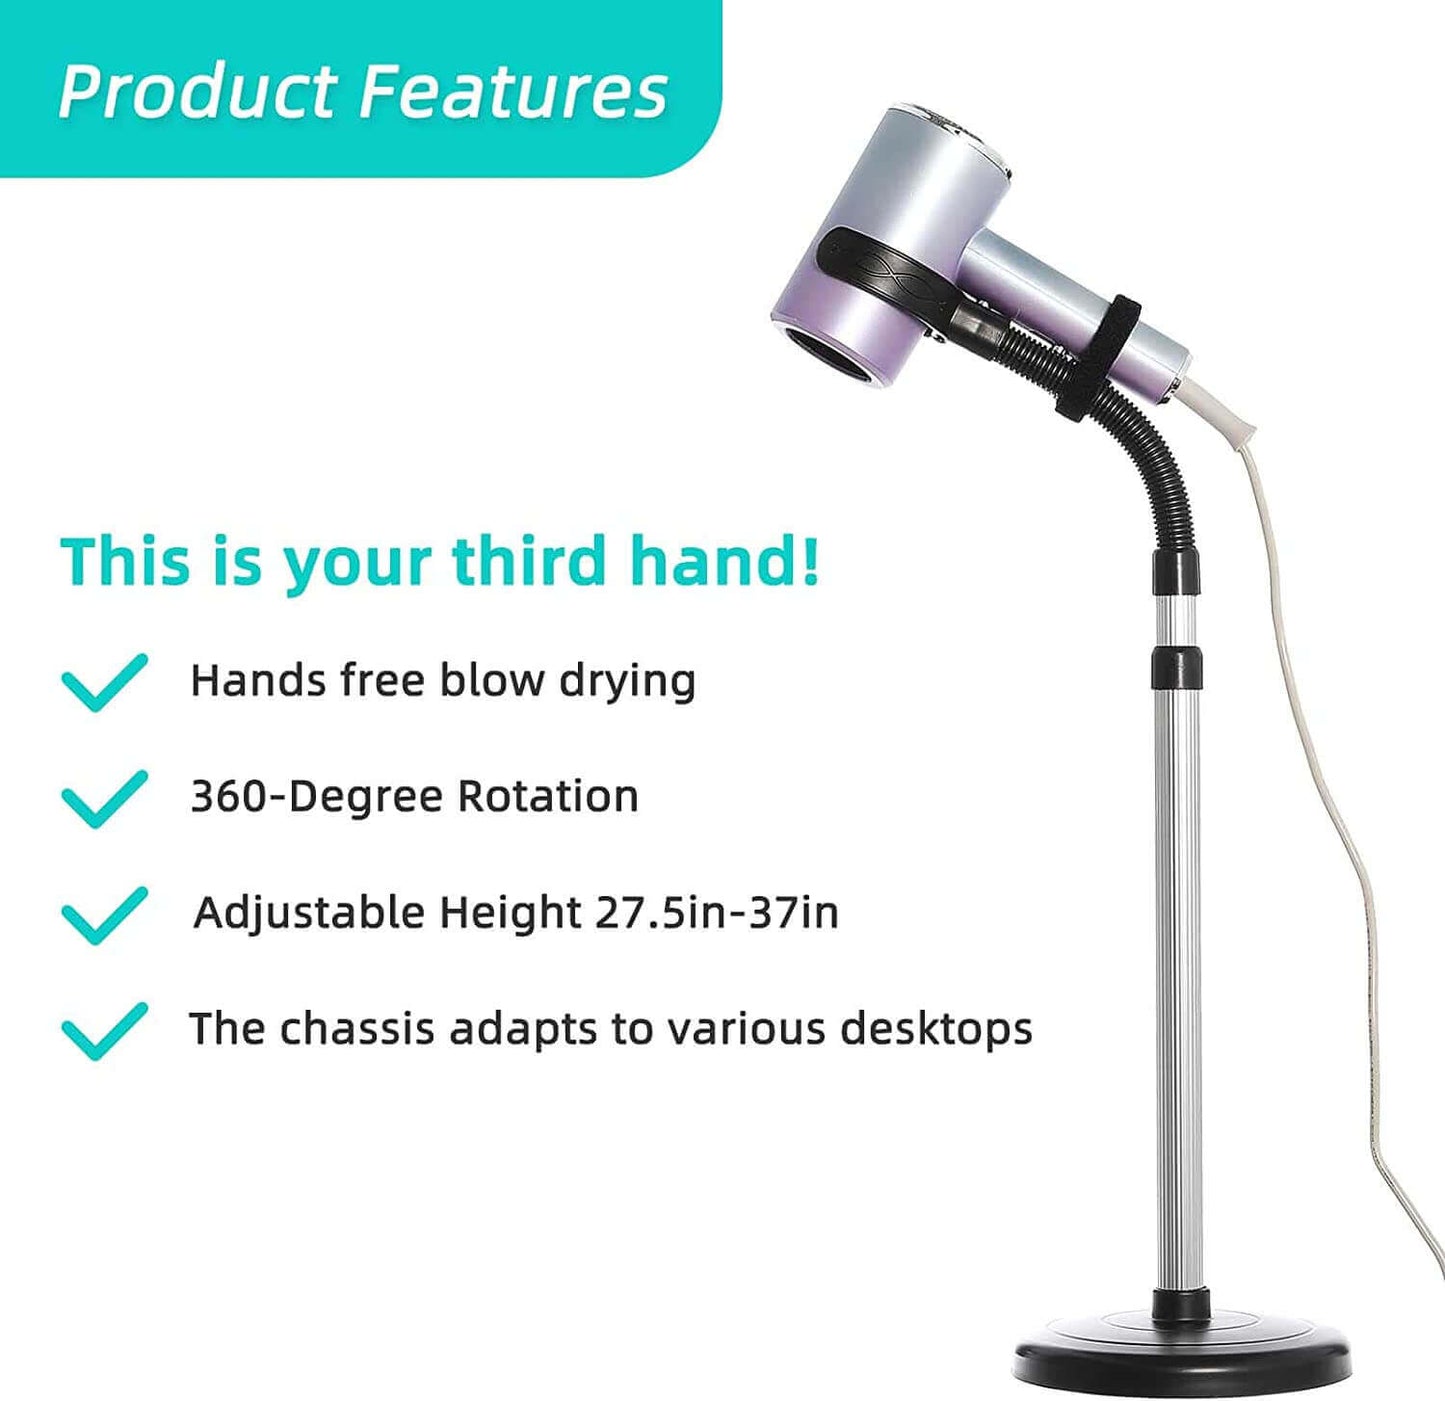 Fanwer adjustable hair dryer stand, product features